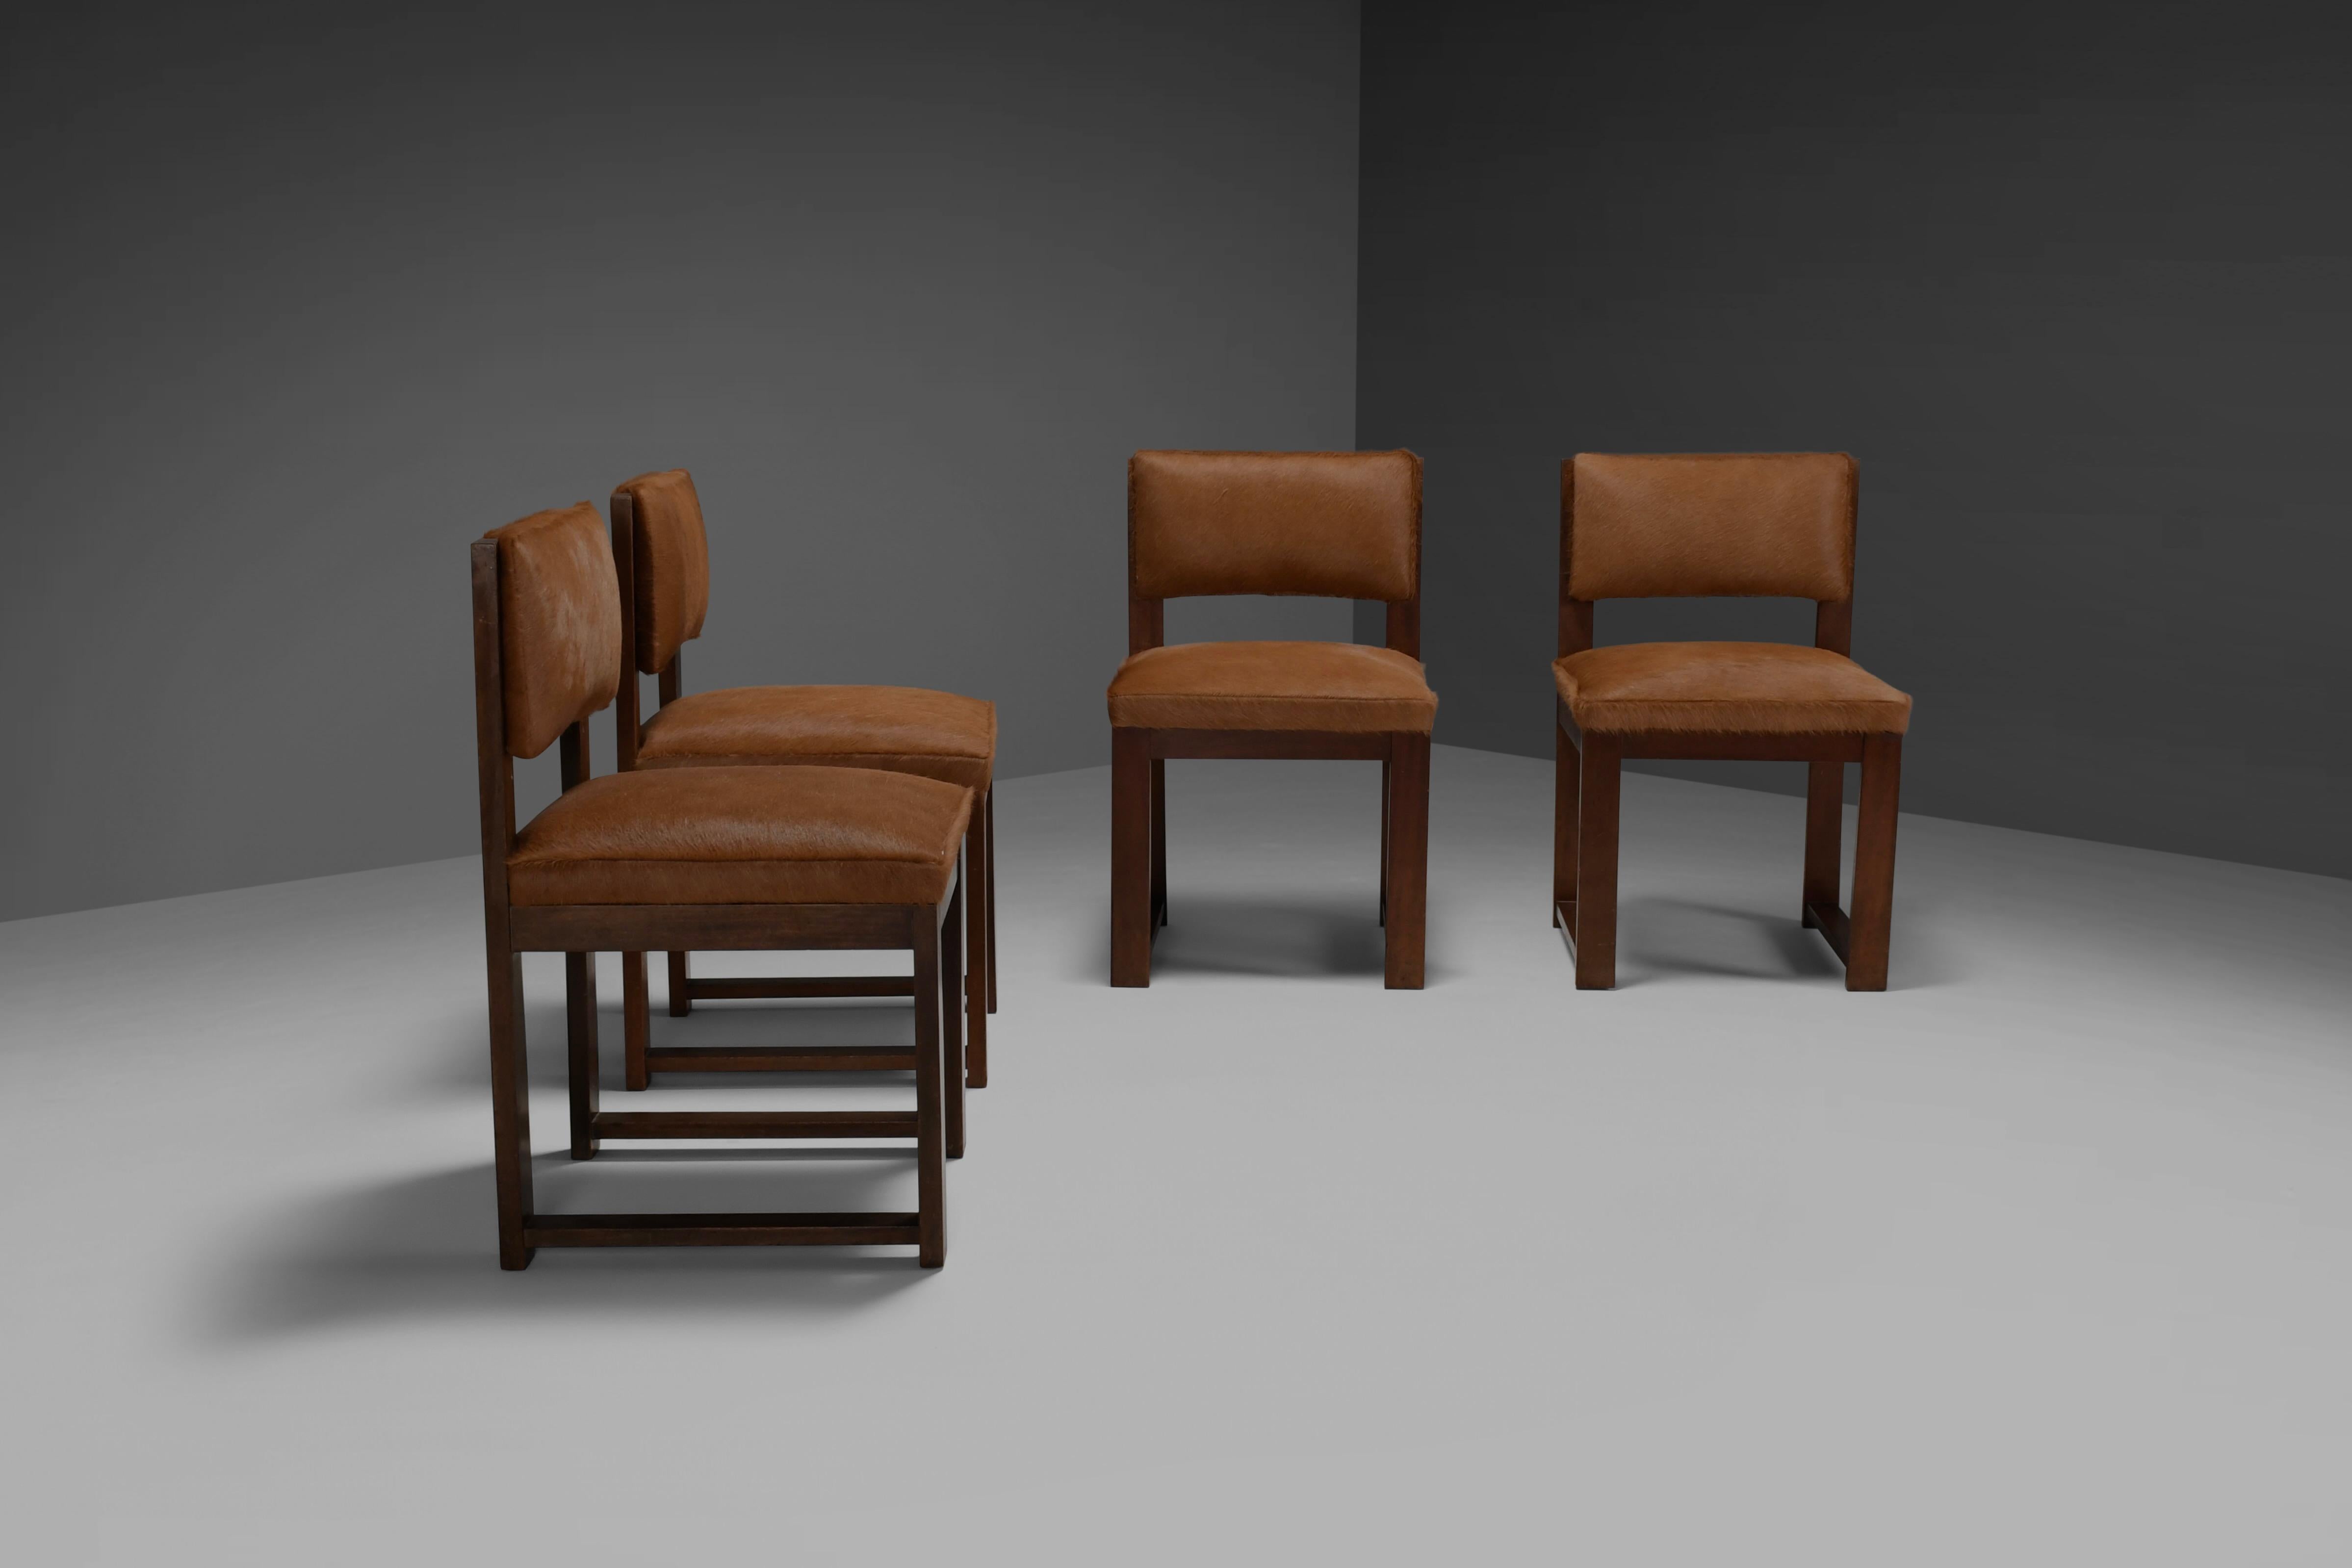 Set of 4 Minimalist Art Deco Dining Chairs in Cowhide, Netherlands, 1940s  For Sale 3